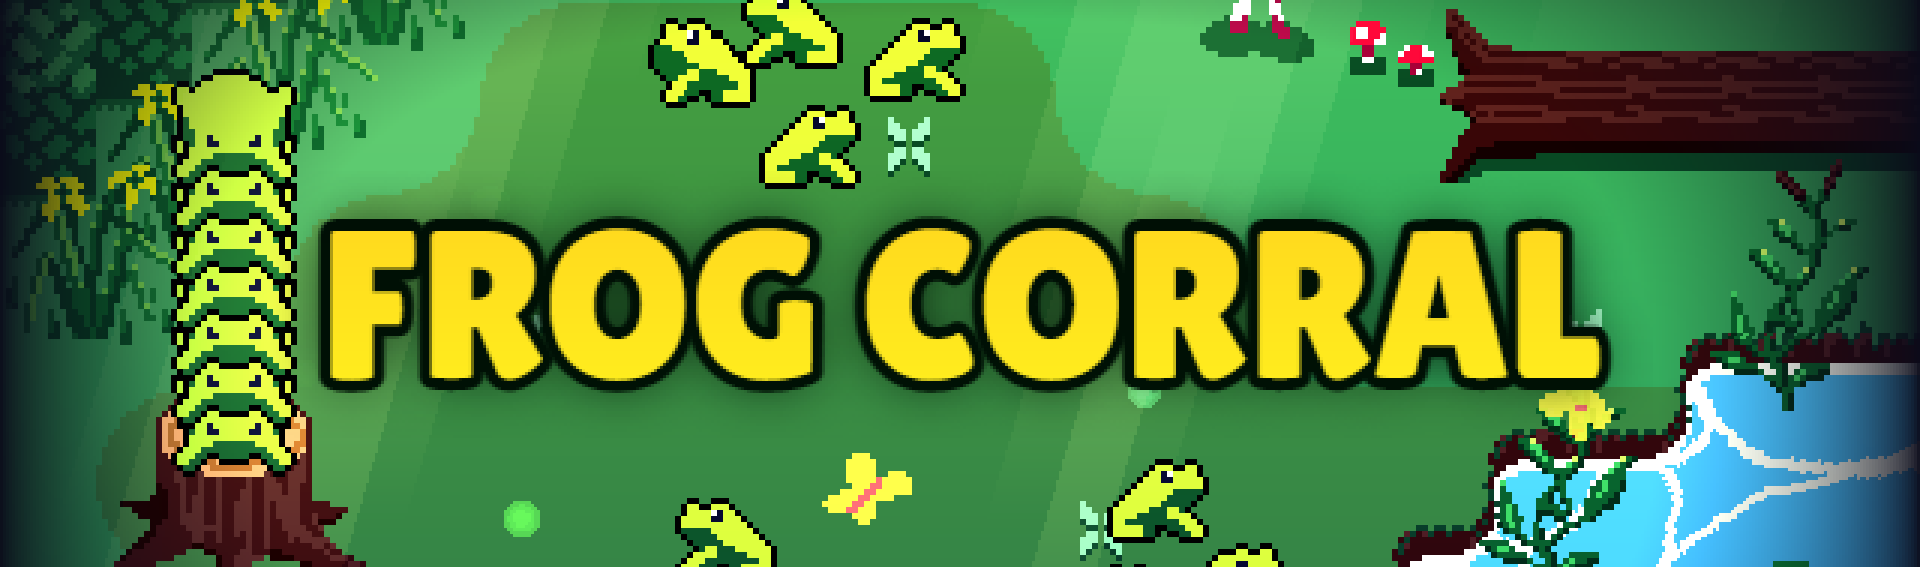 Frog Corral